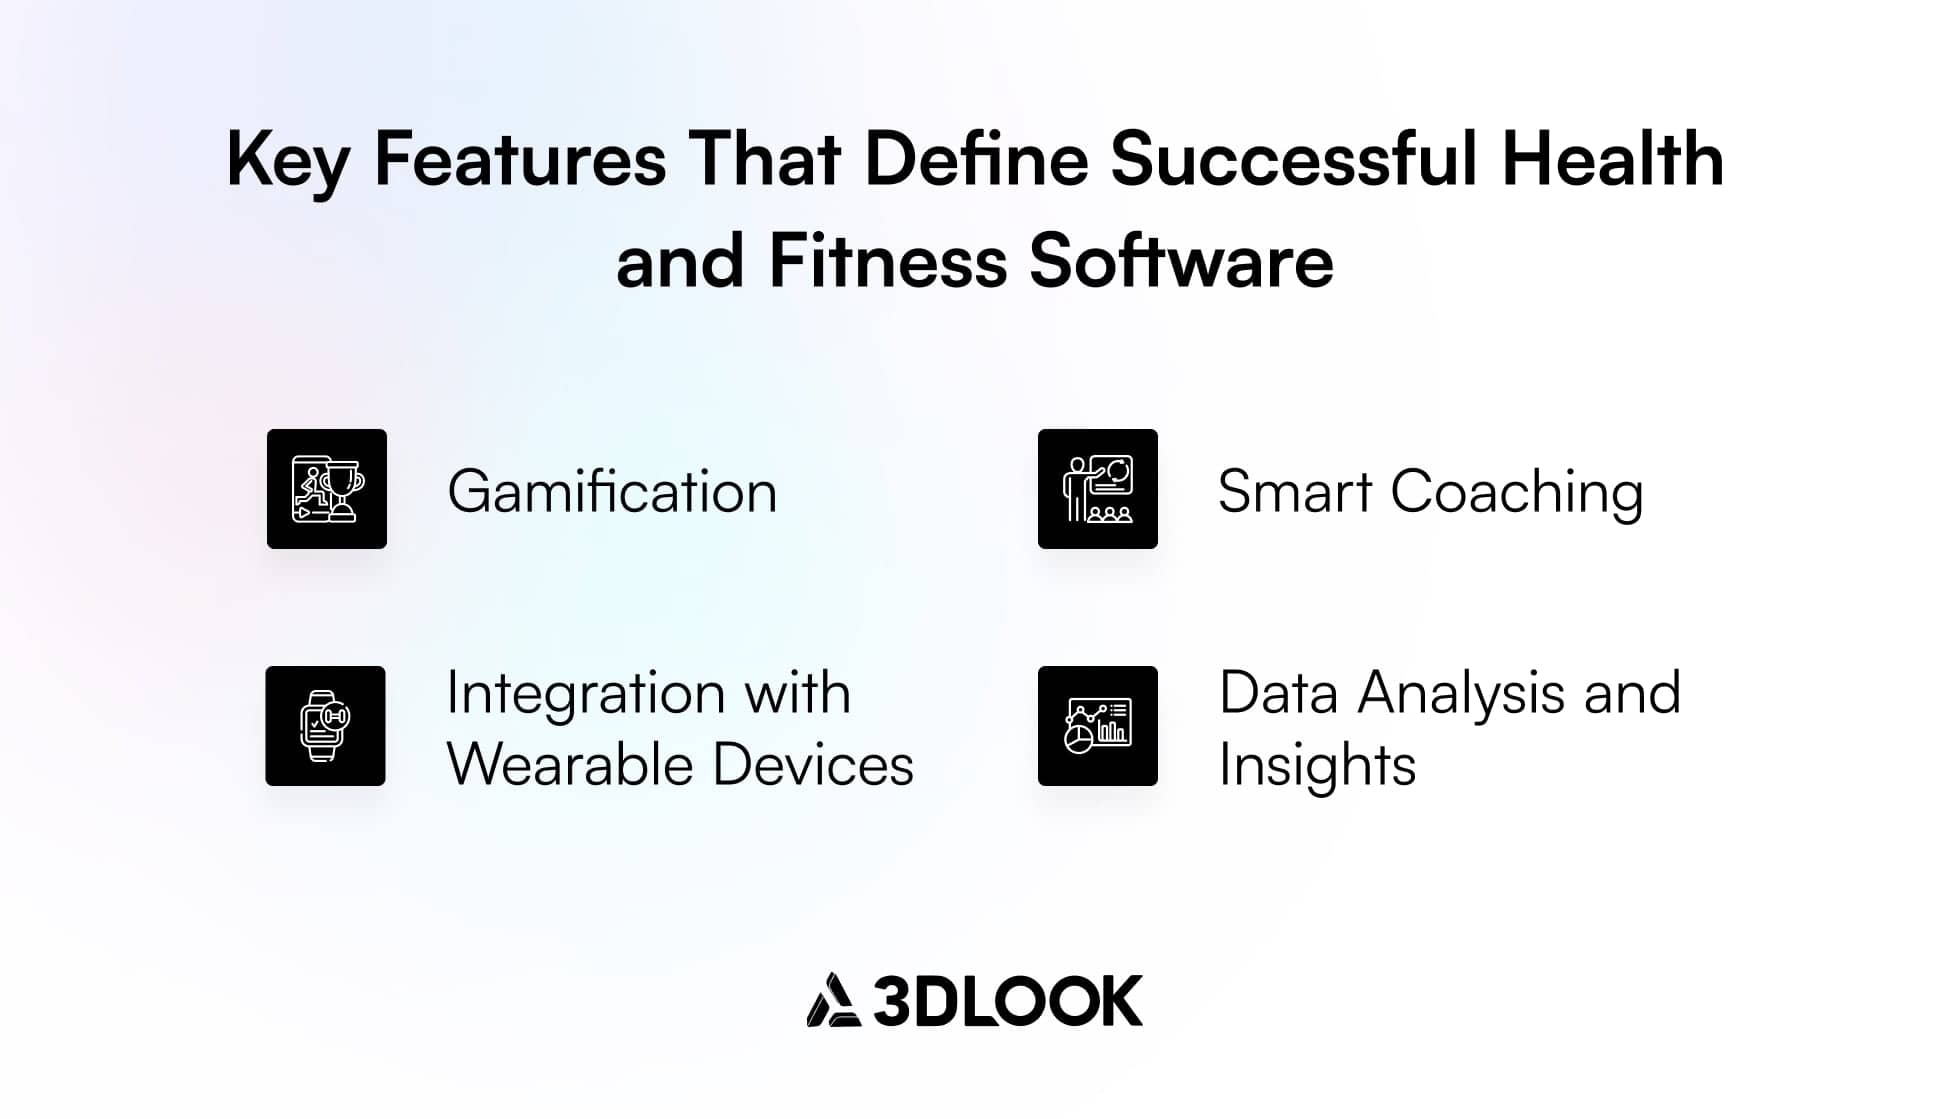 key features that define successful health & fitness software